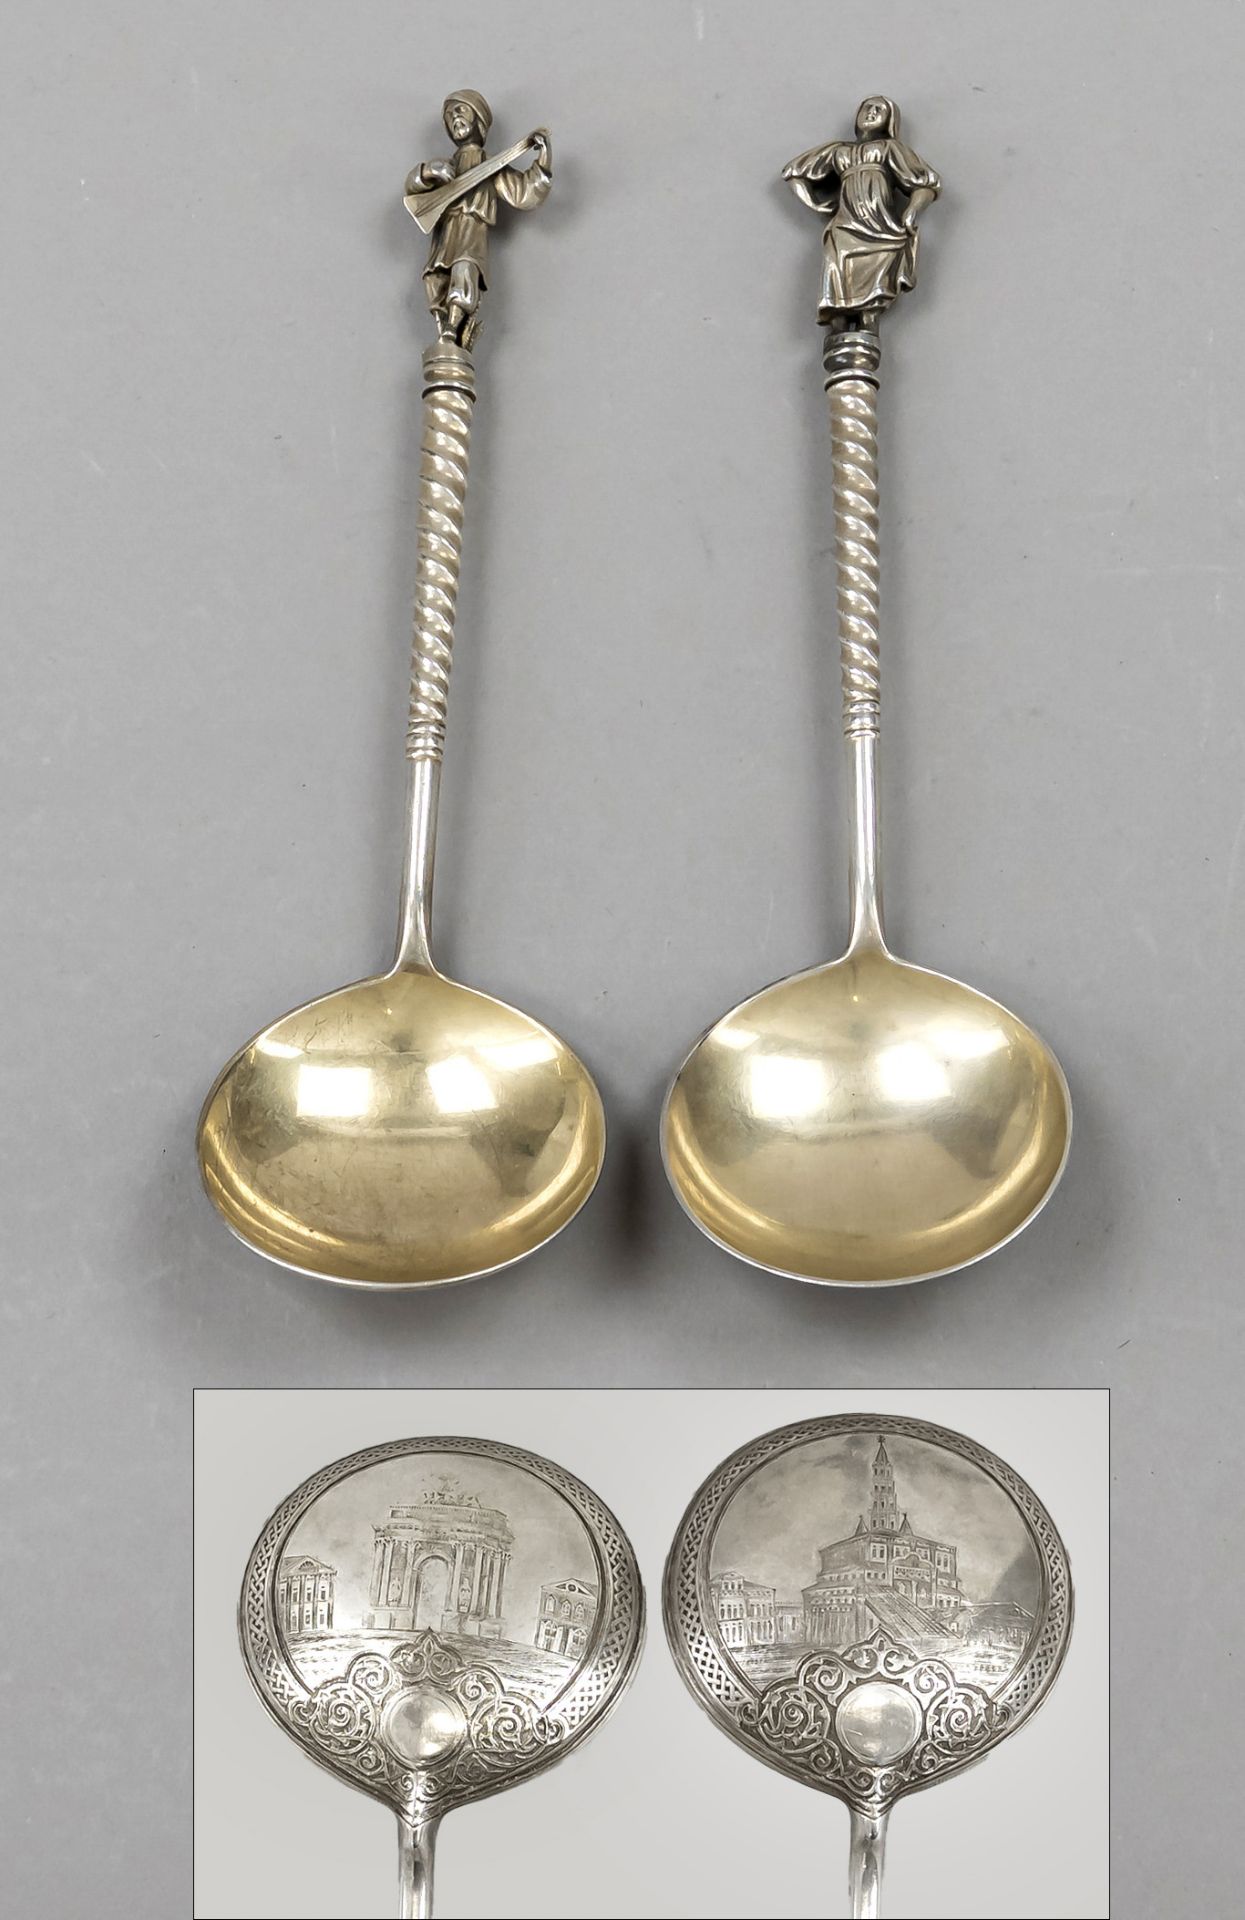 A pair of ornamental spoons, hallmarked Russia, 1877, Moscow city mark, struck hallmarks, Siber 84